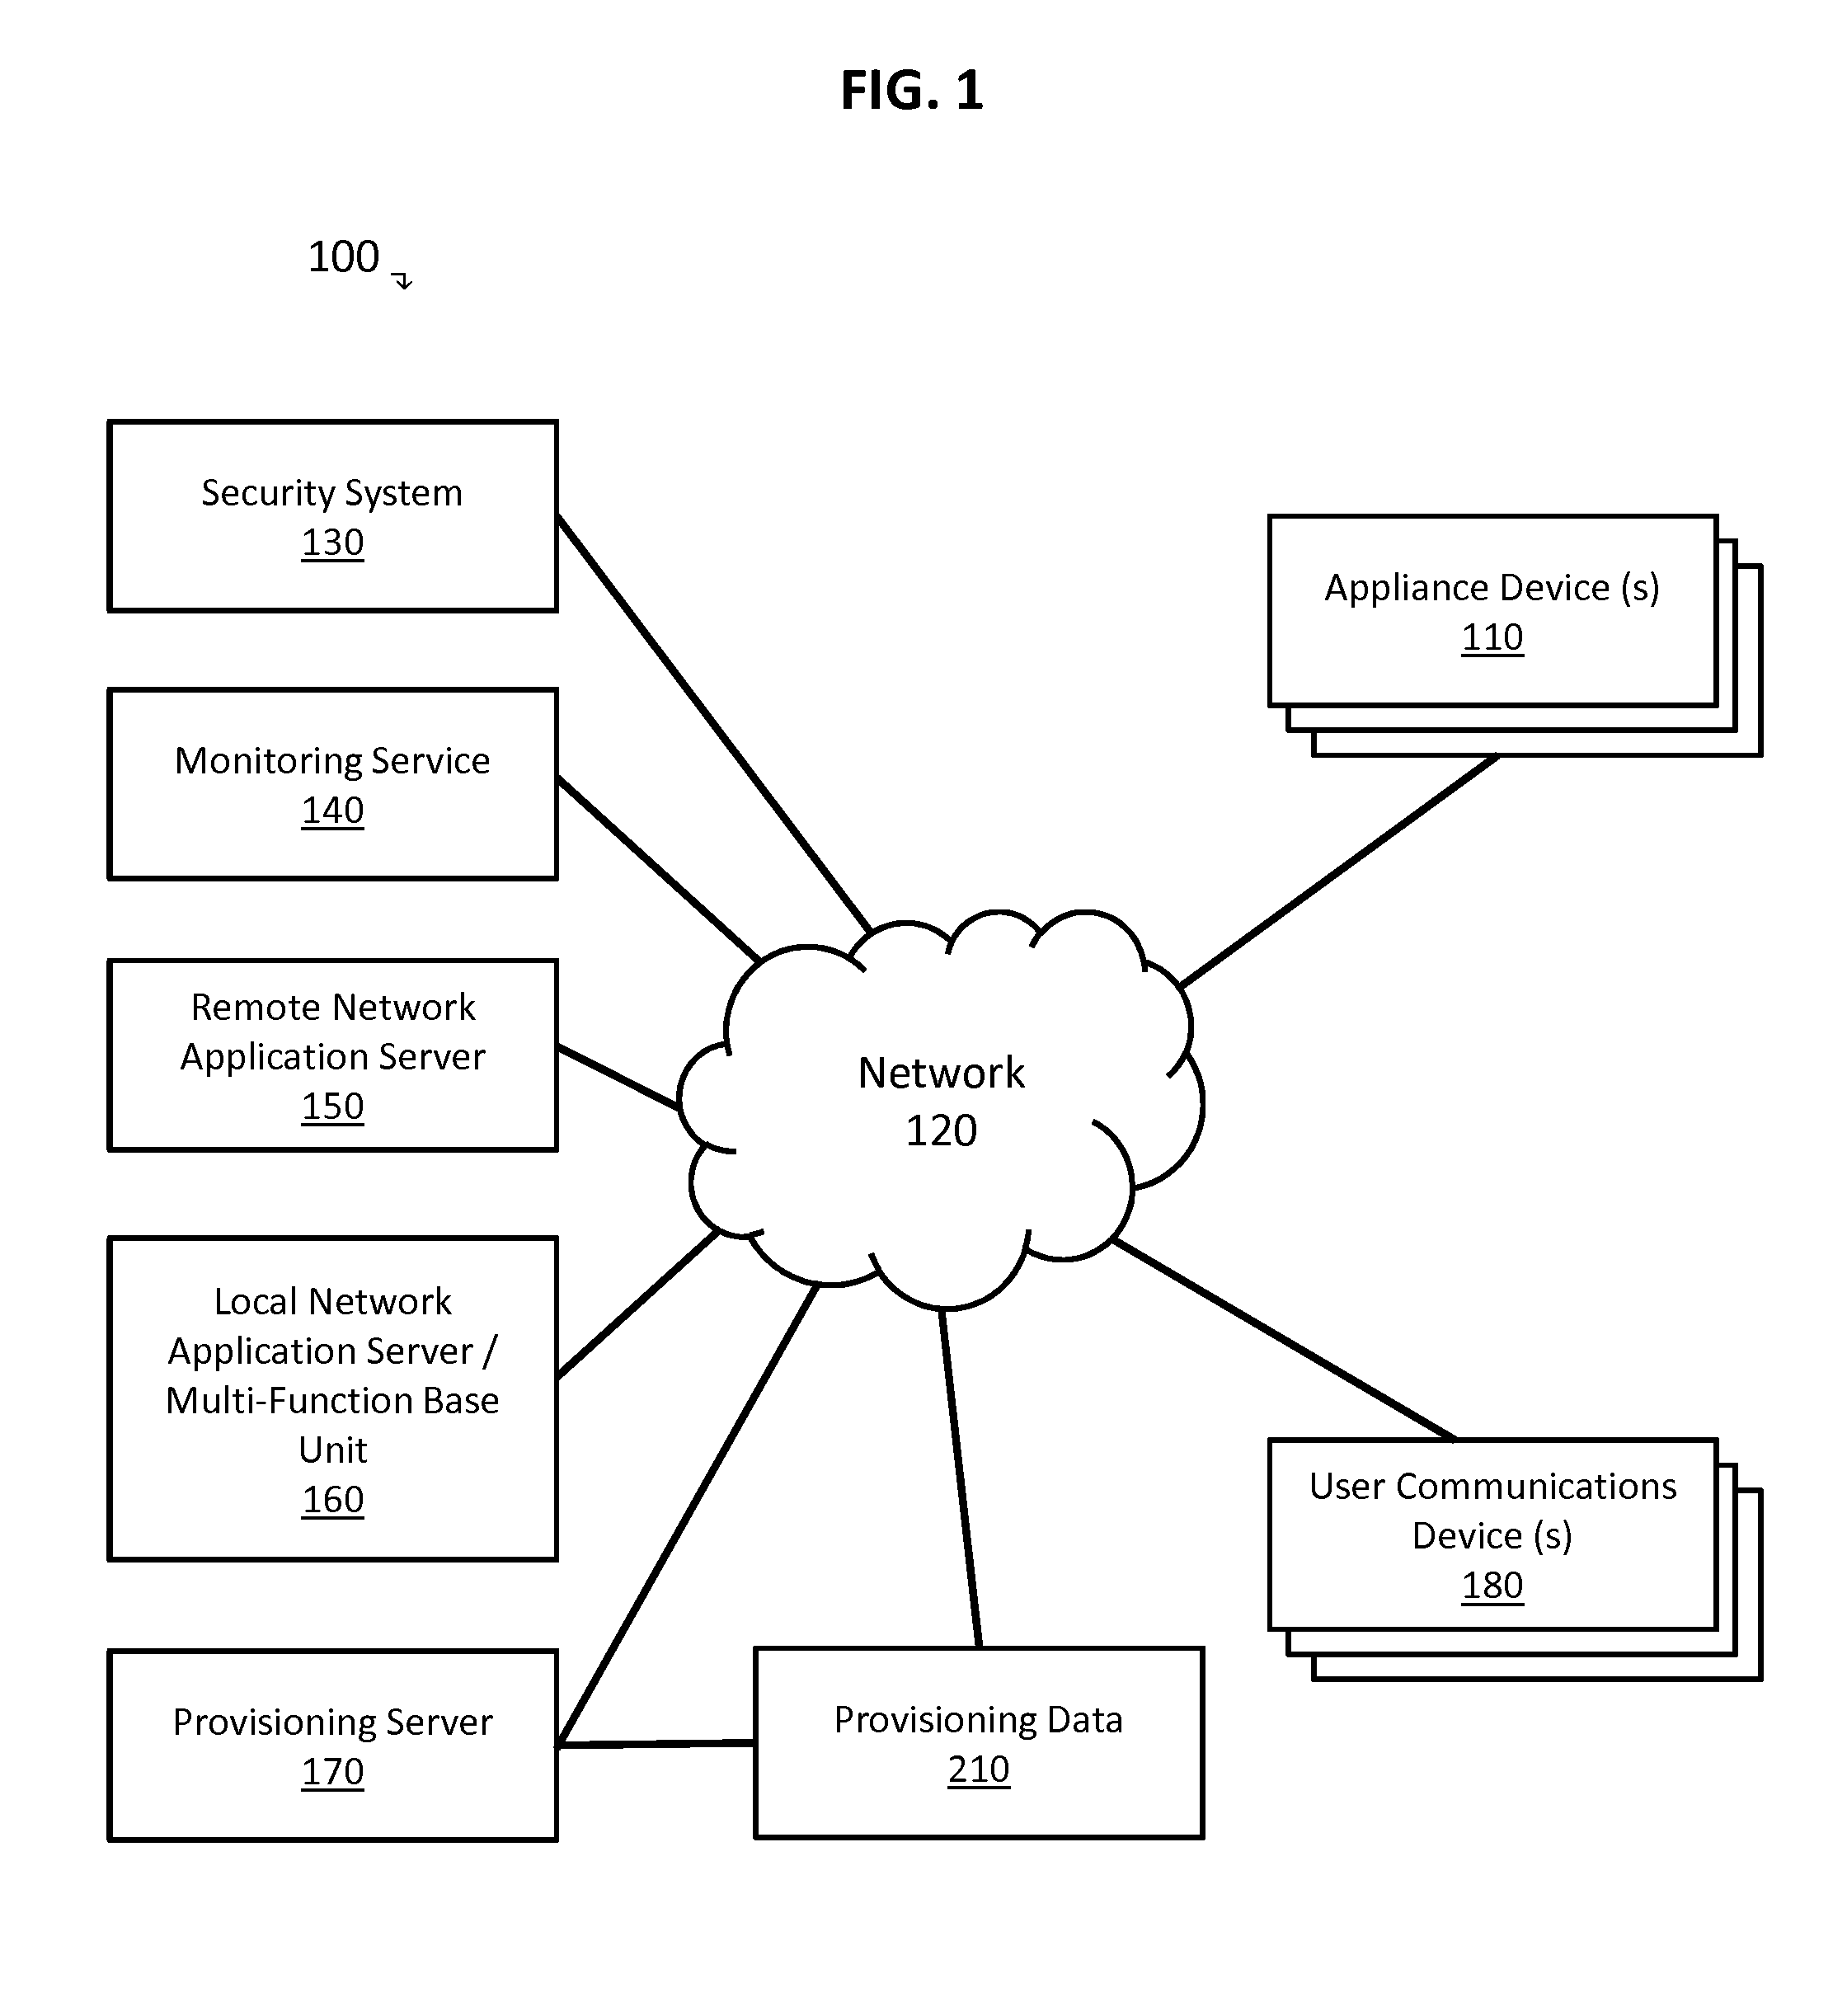 Appliance Device Integration with Alarm Systems